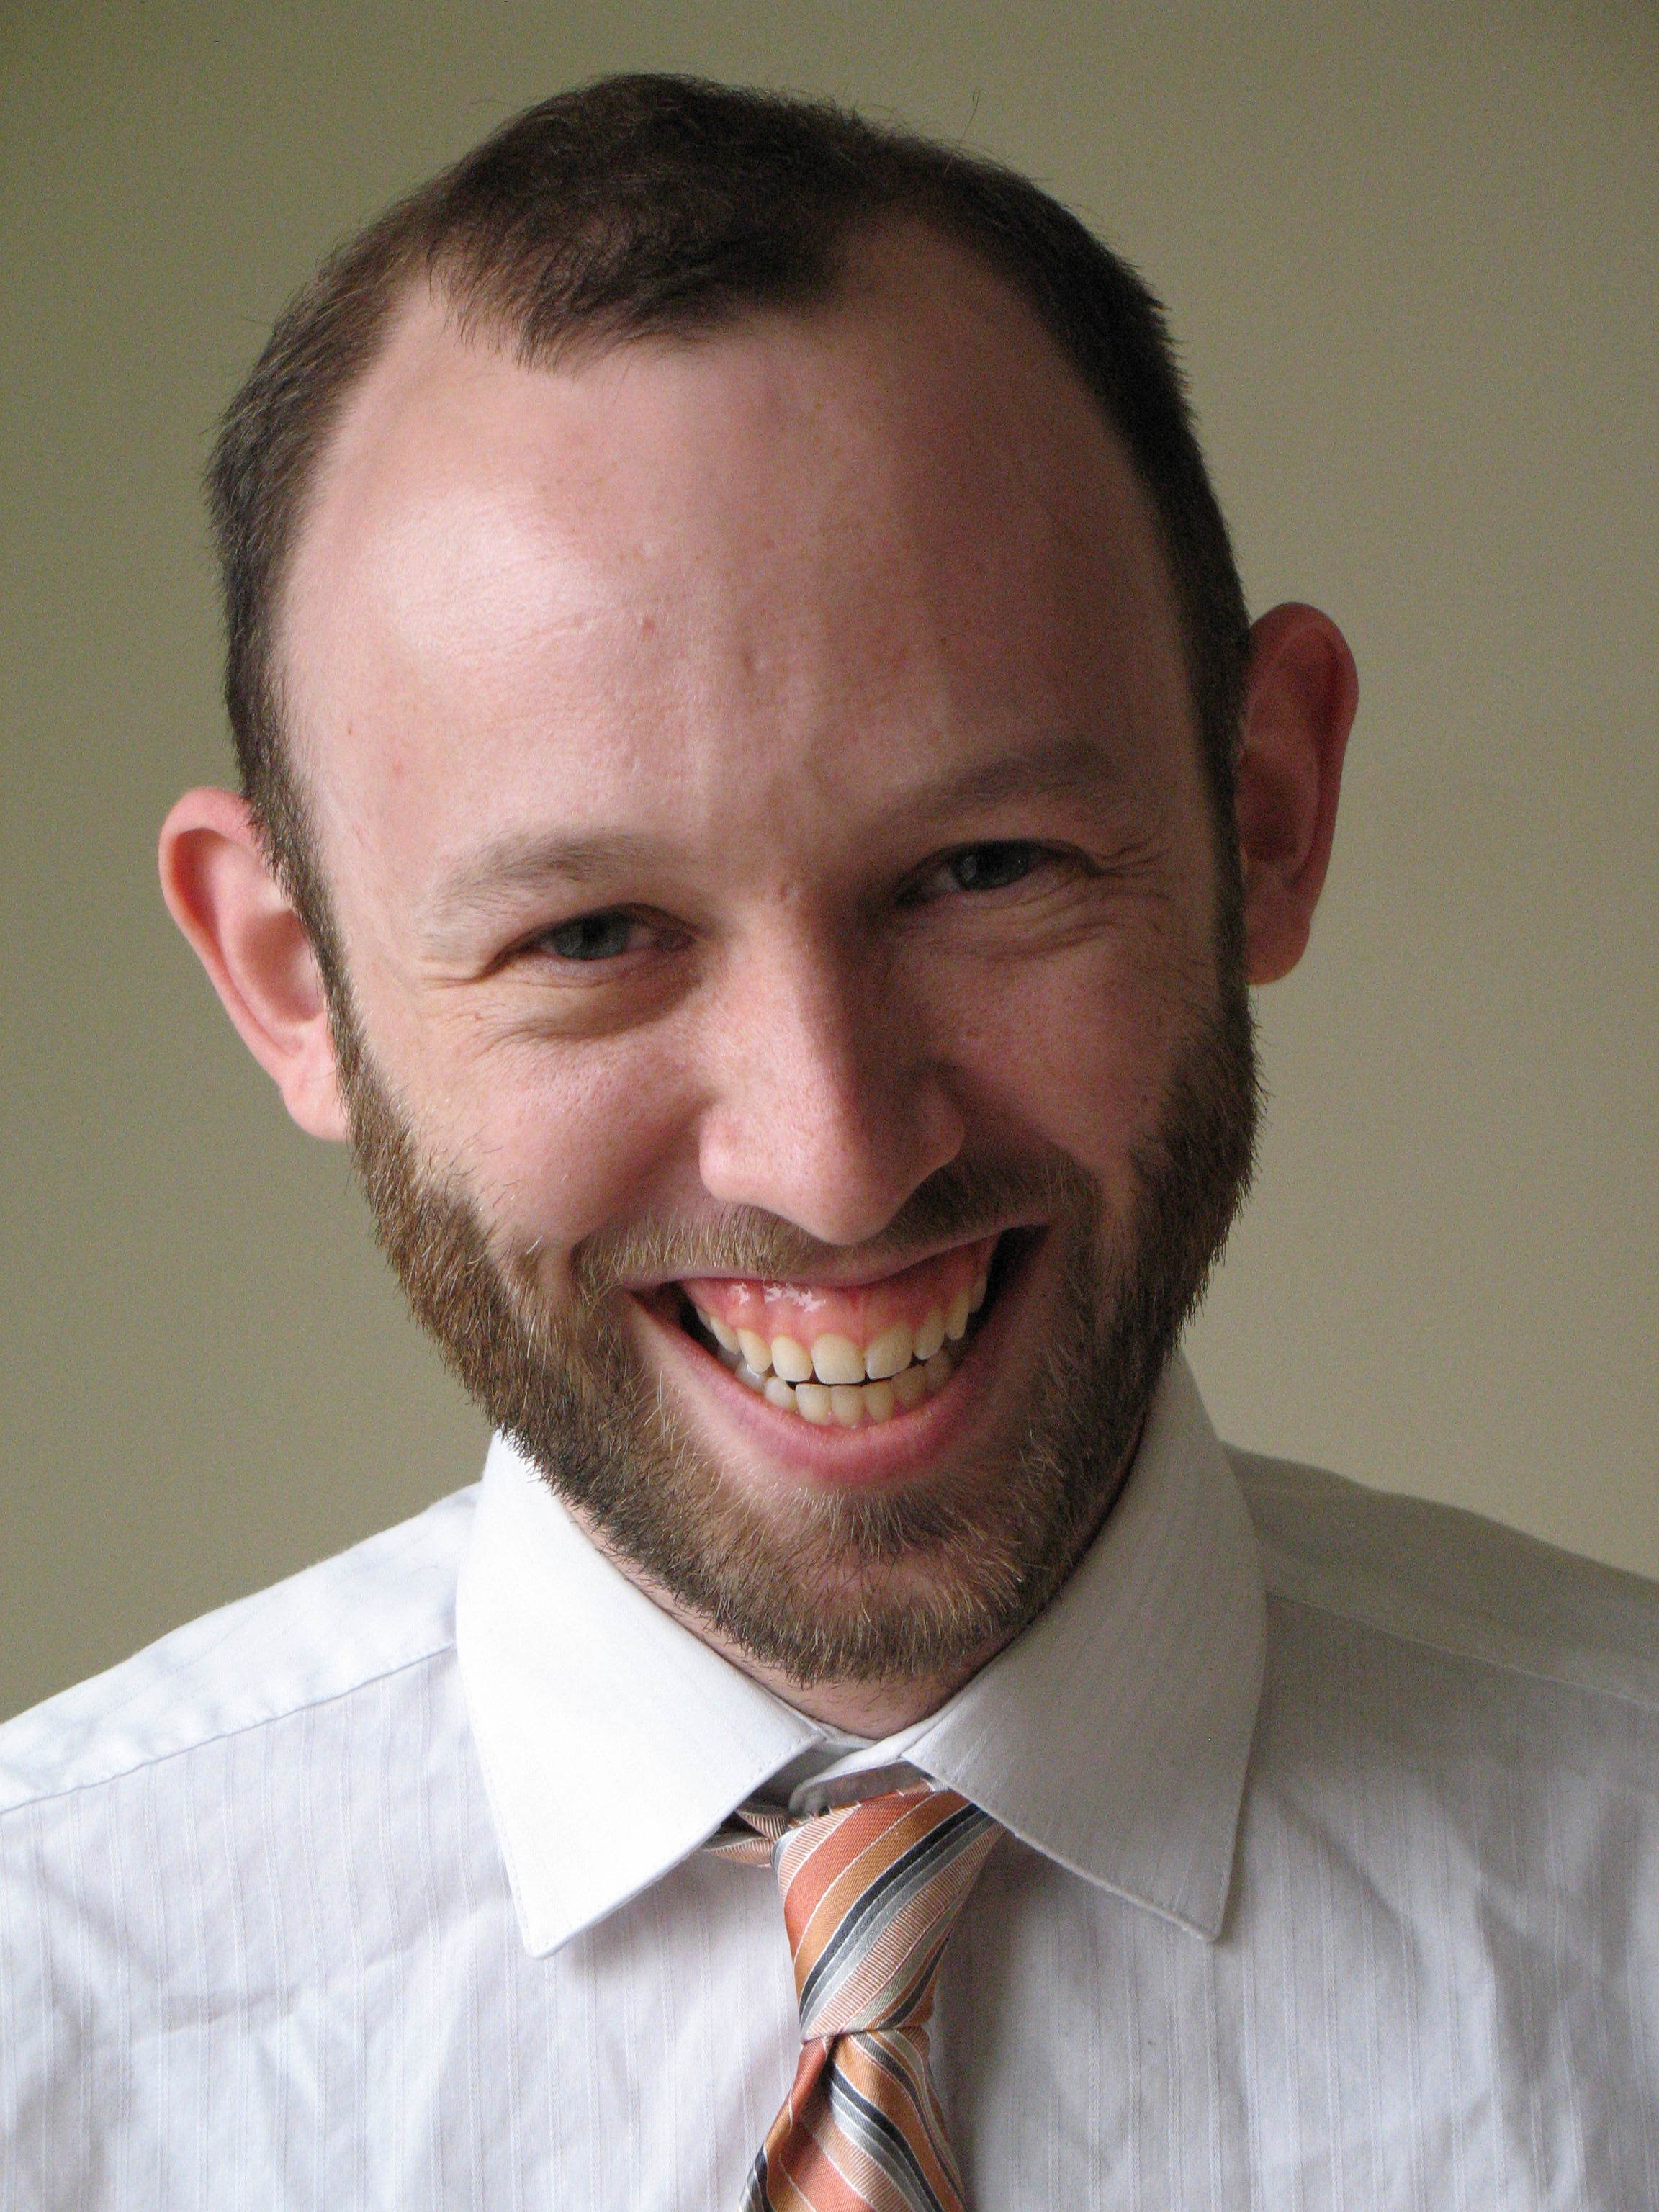 Alt text: a young white man with brown hair and a light brown clean-cut beard and mustache laughs at camera while wearing a white button down and orange and blue tie.